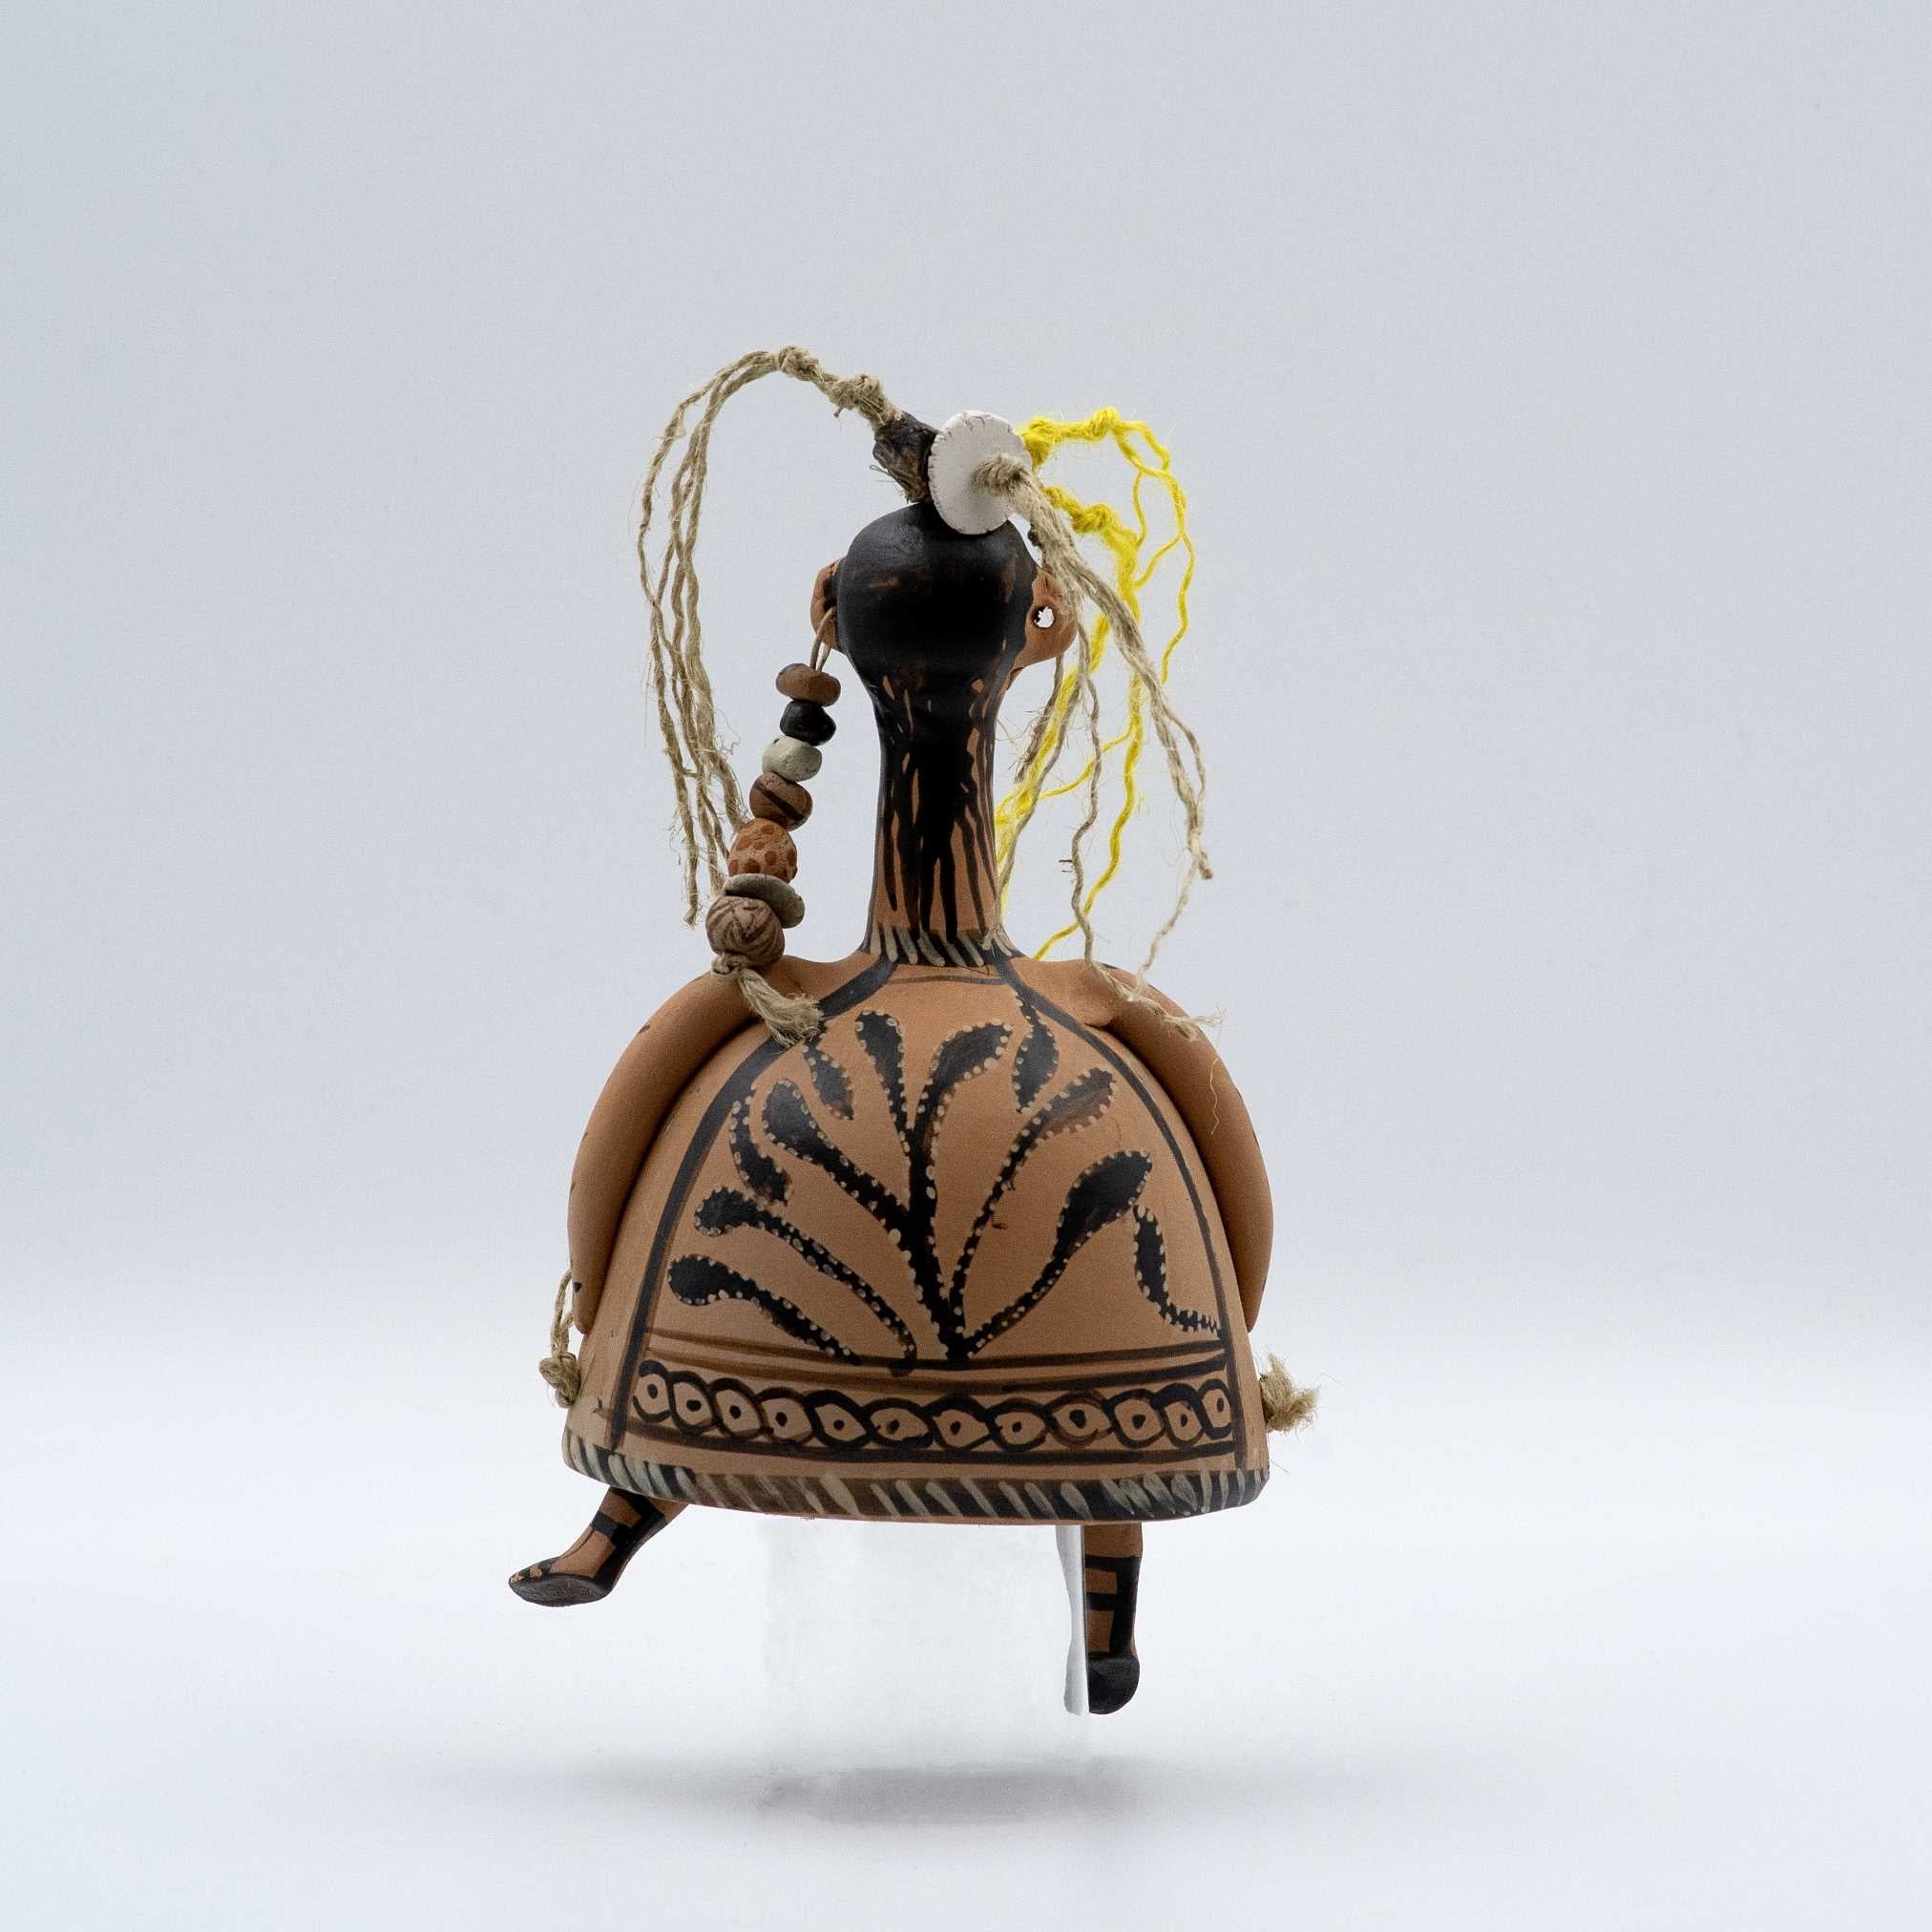 THETIS bell-shaped plangona doll (small)